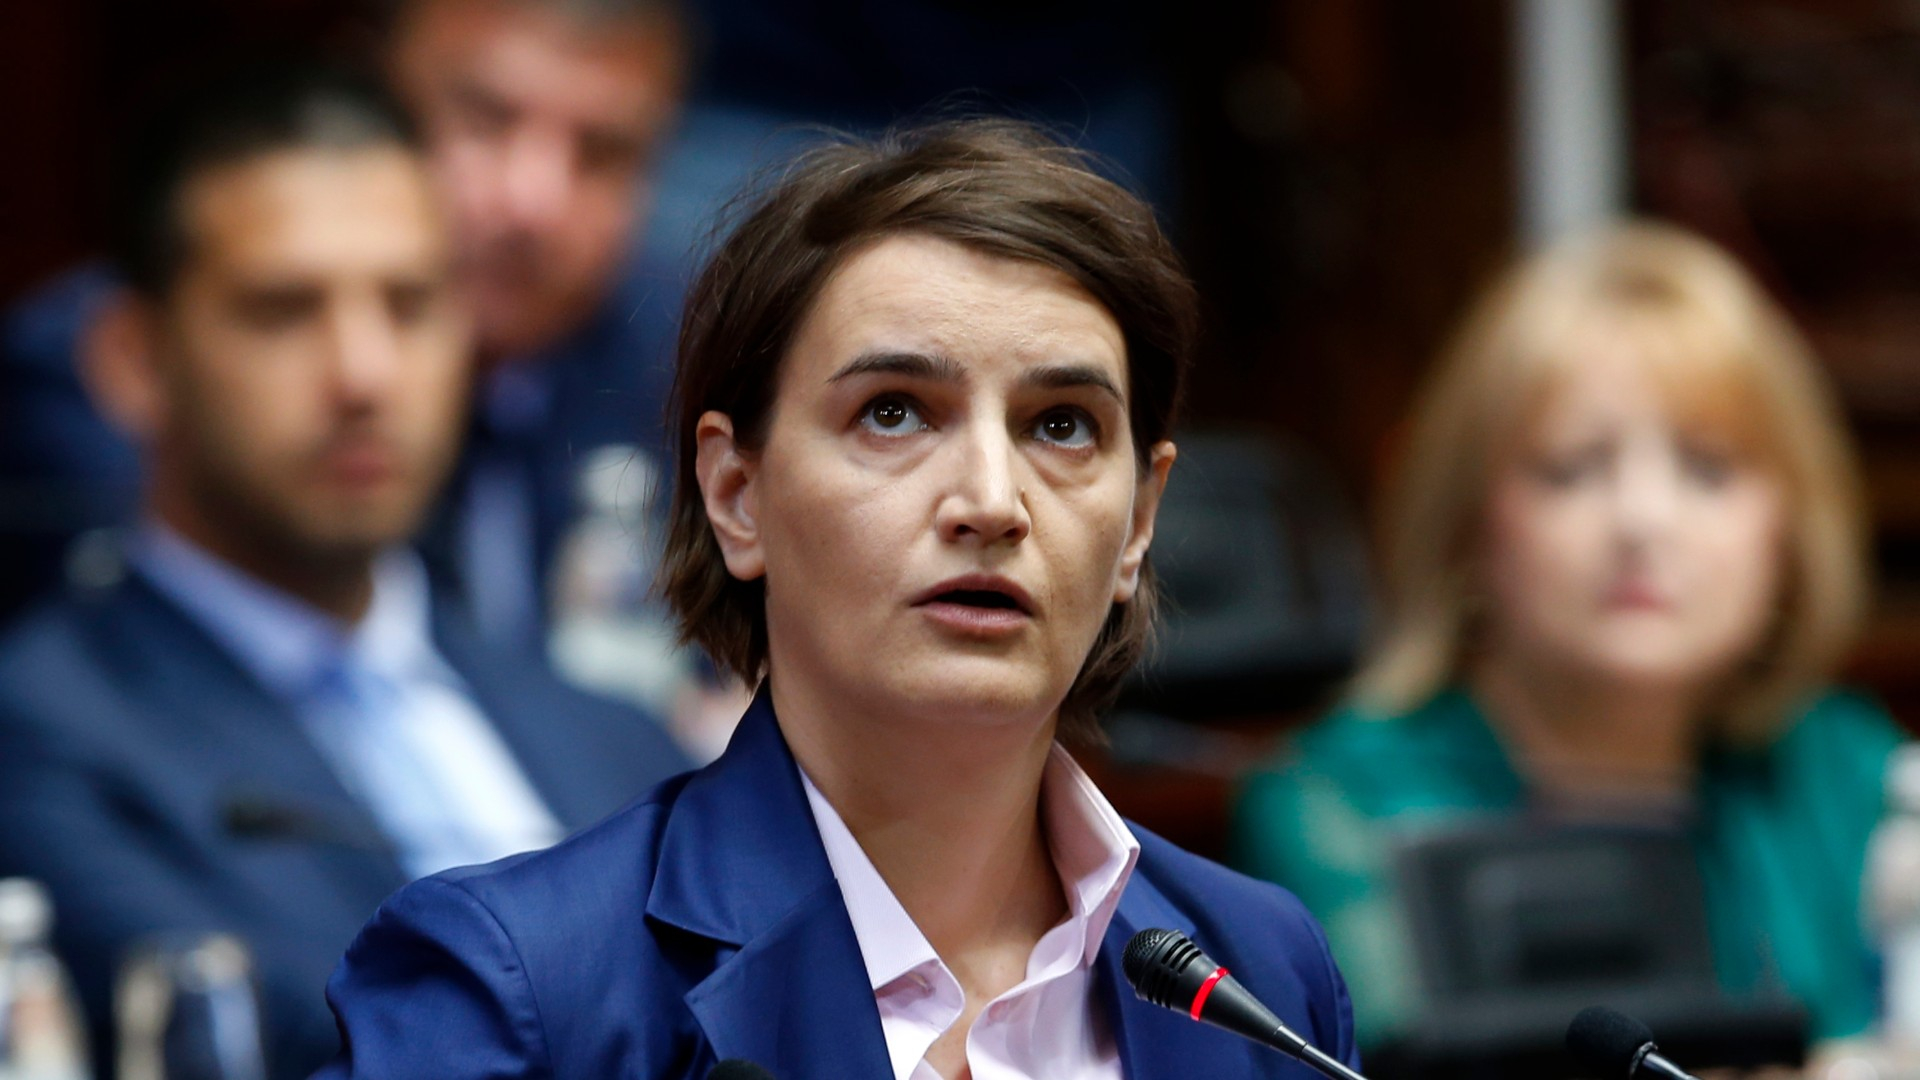 Ana Brnabic is Serbia's first female PM and its first openly gay leader. /Darko Vojinovic/AP Photo
